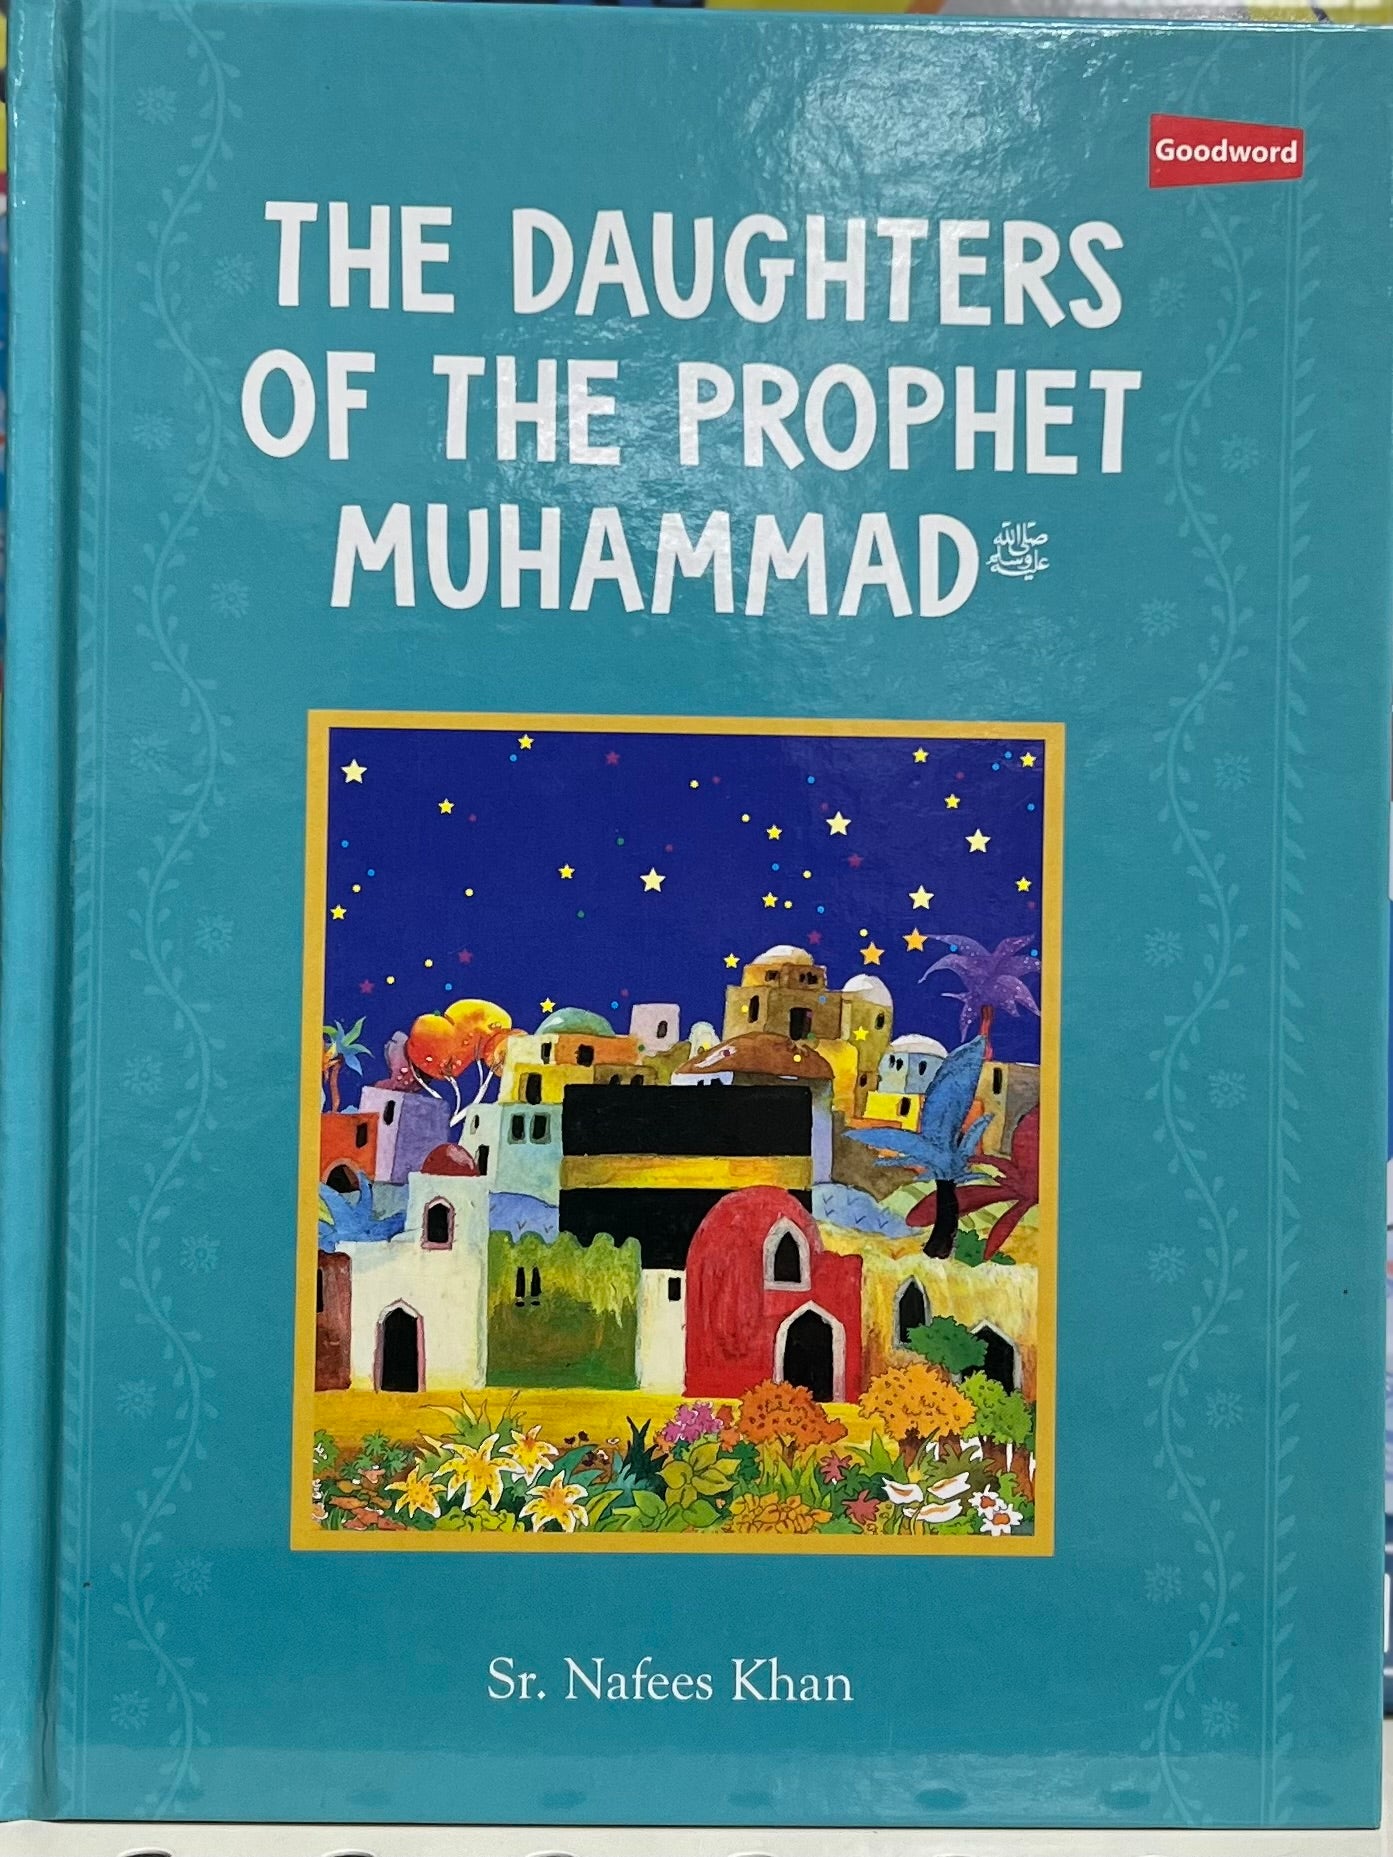 The Daughters of the Prophet Muhammad